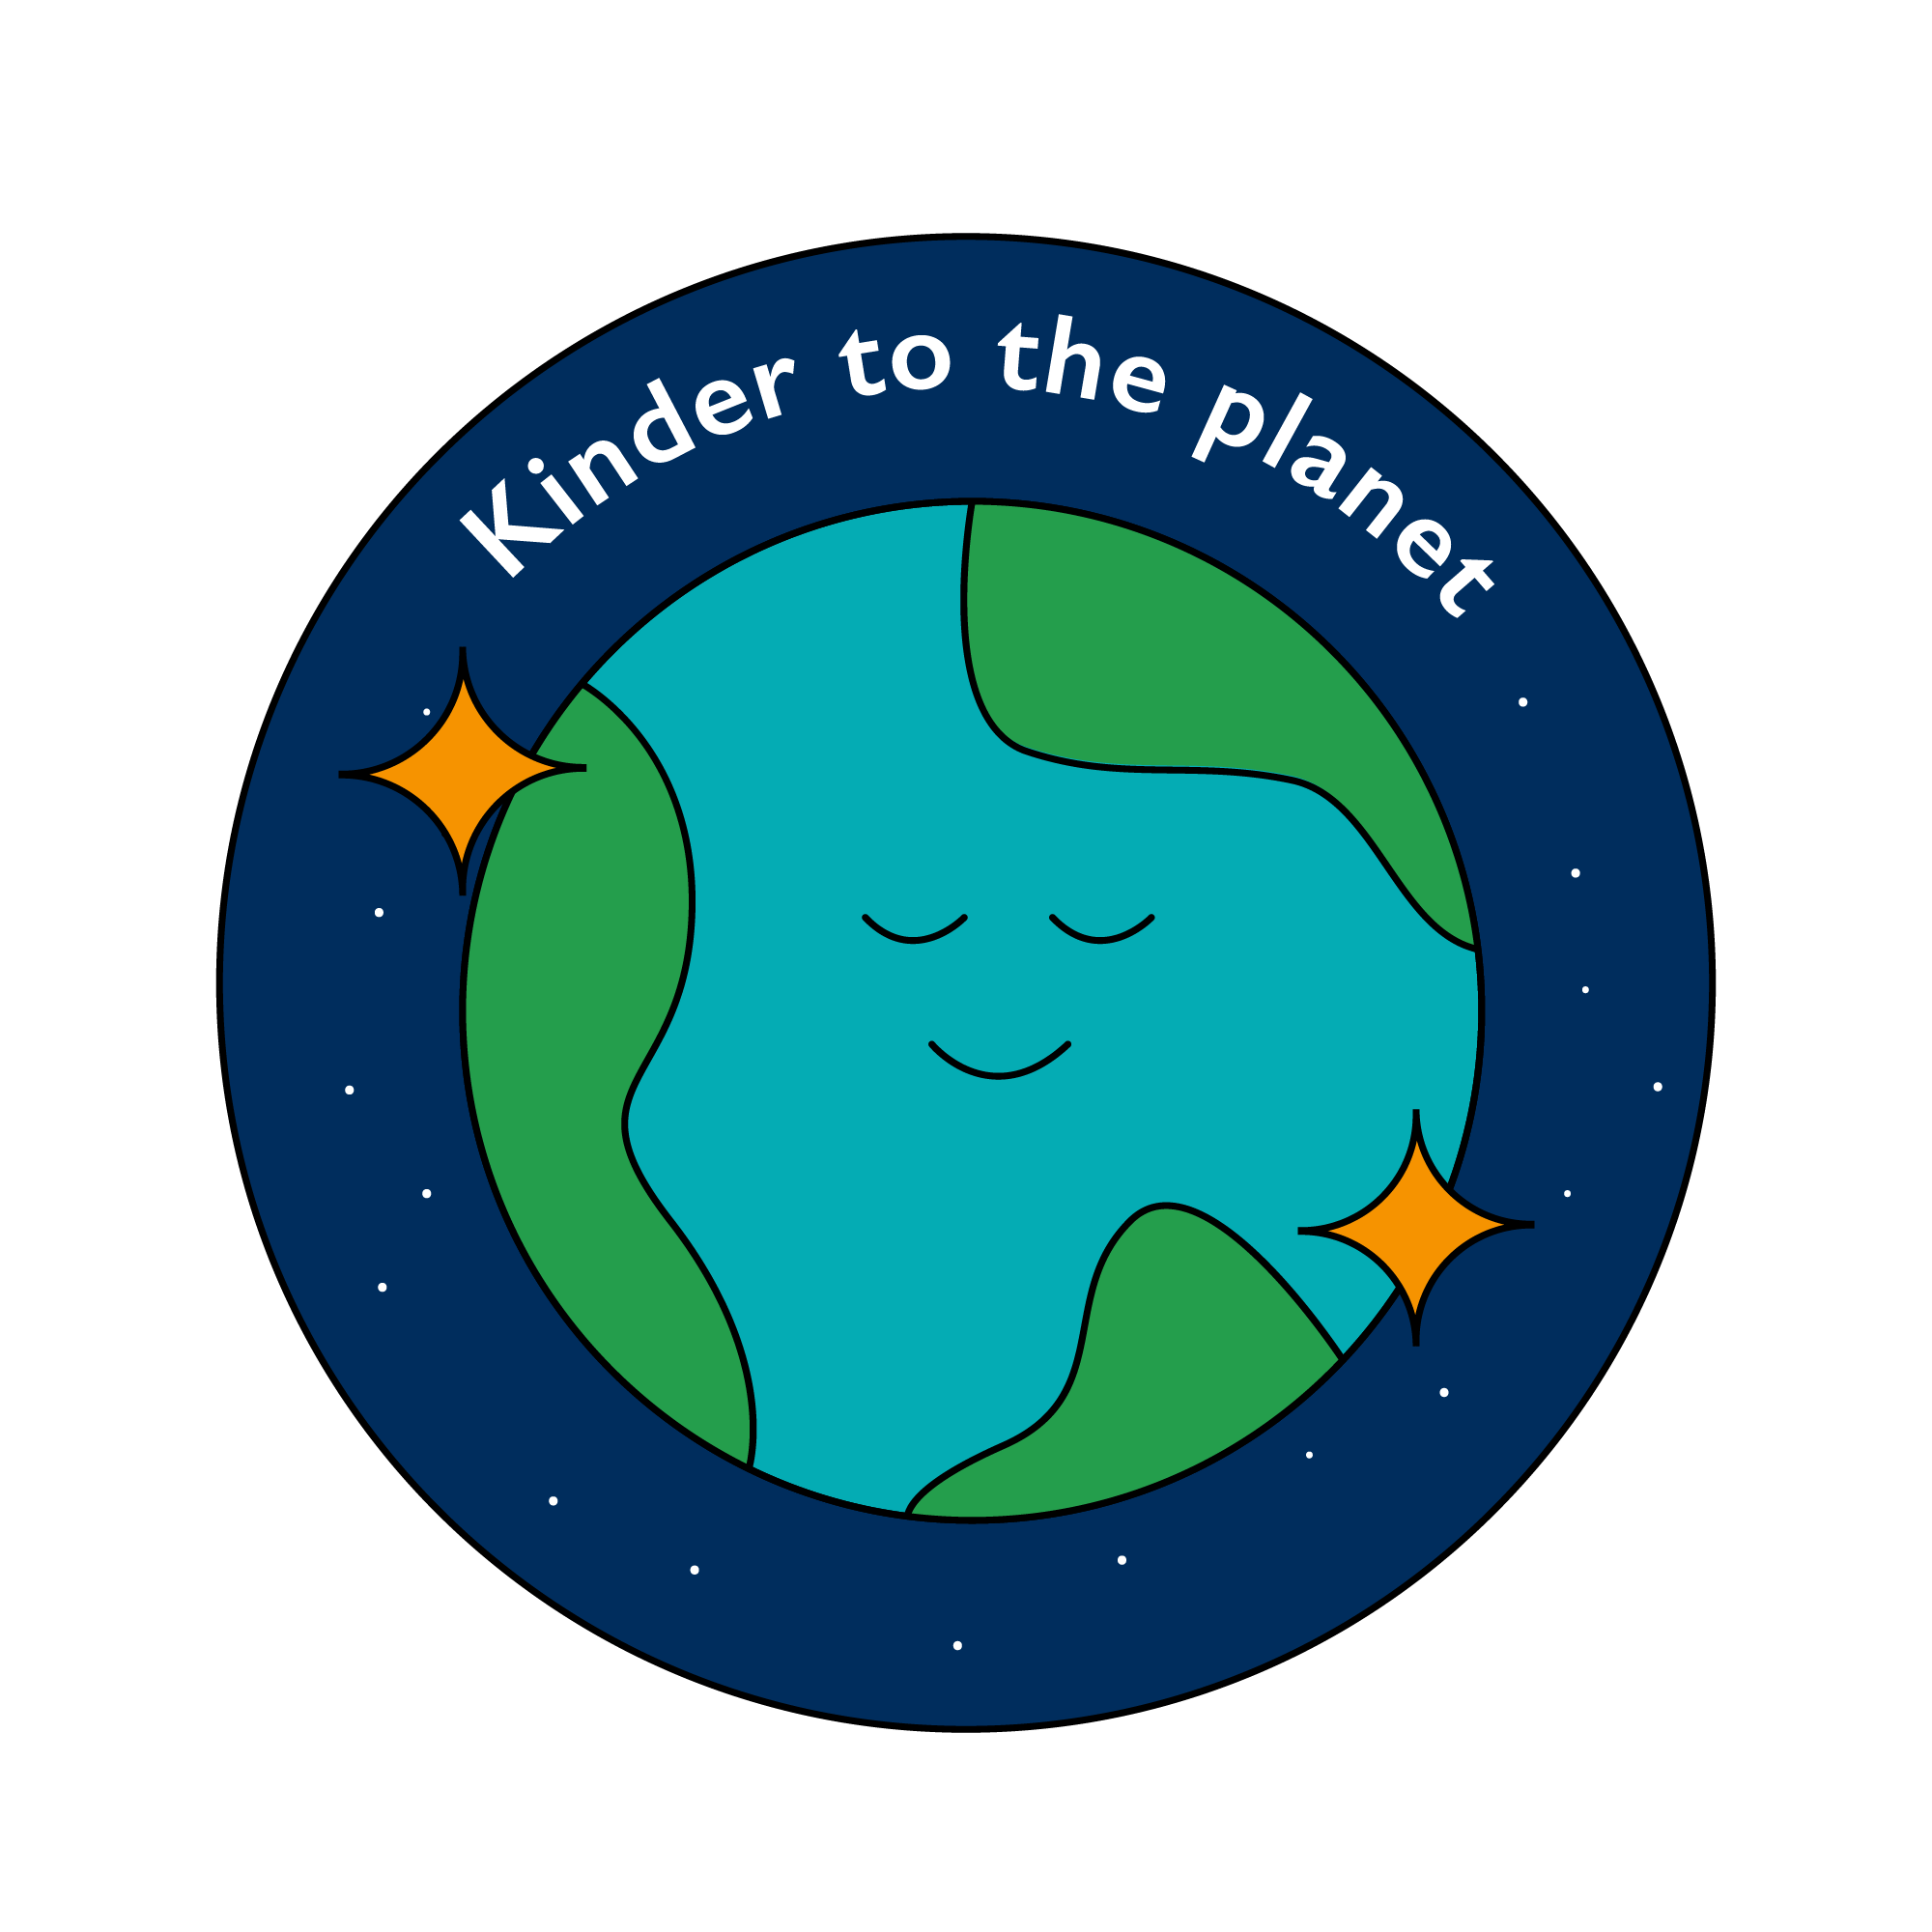 Kinder to the planet